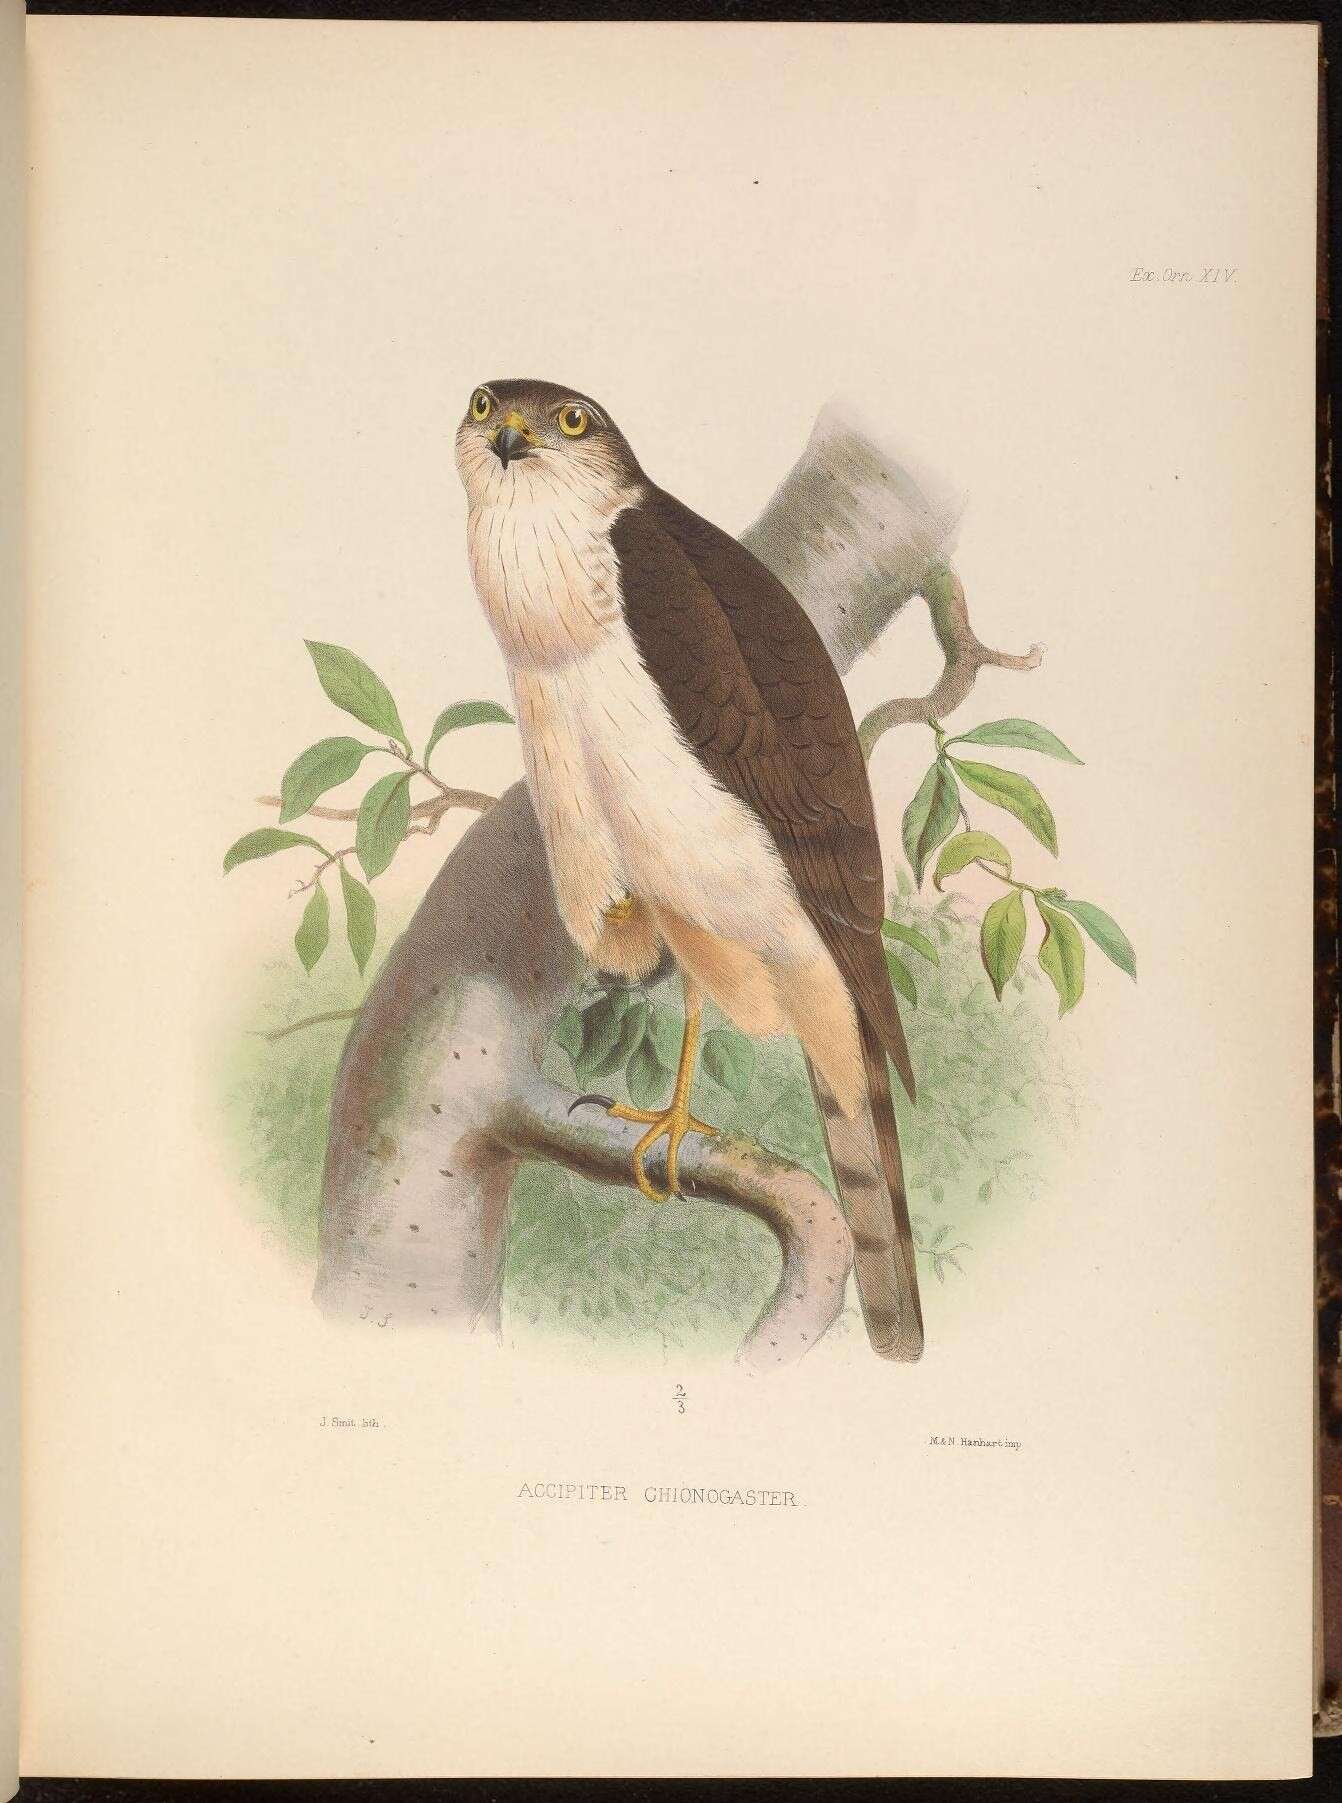 Image of White-breasted Hawk